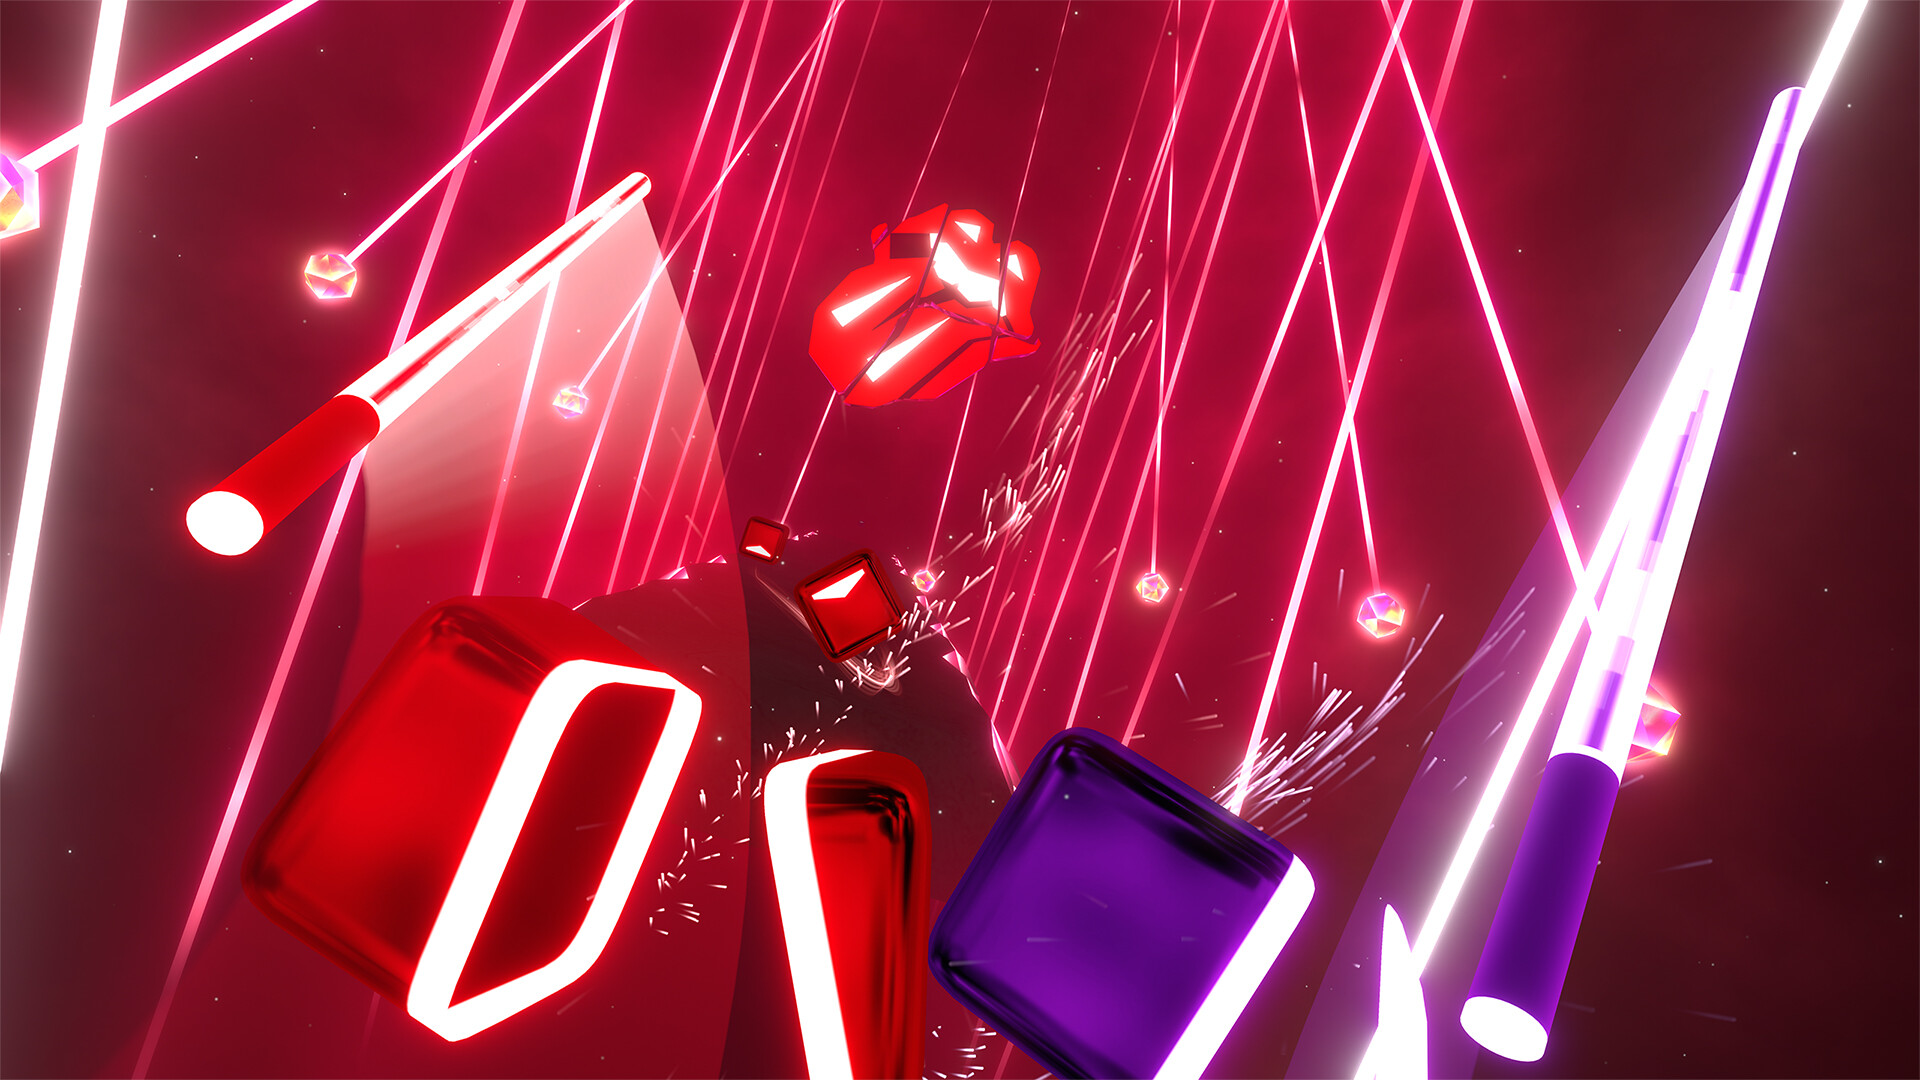 Beat Saber - The Rolling Stones - "Gimme Shelter" Featured Screenshot #1